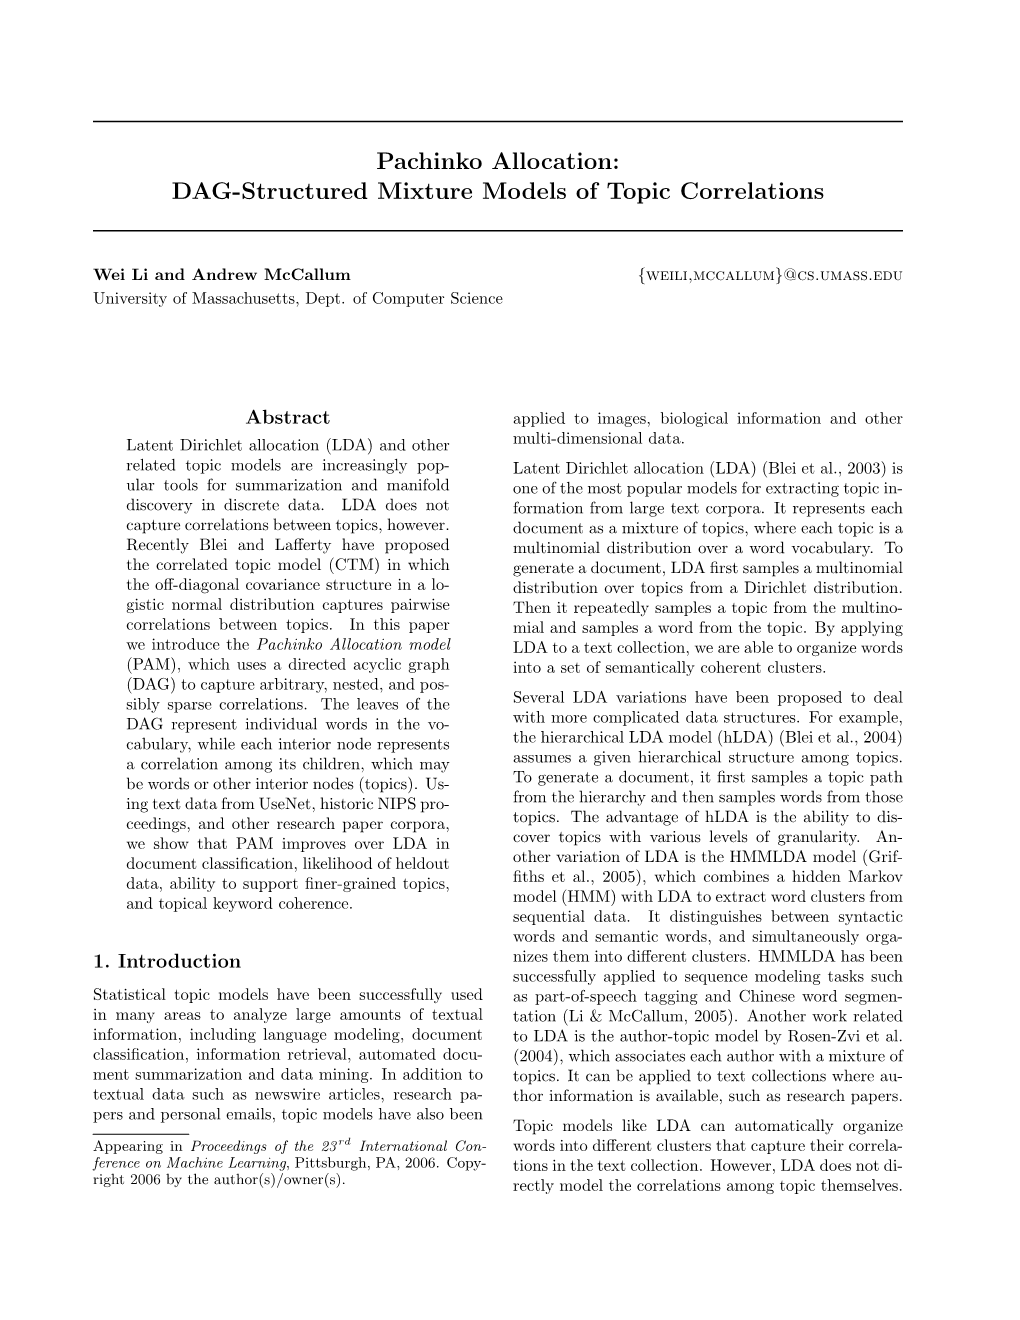 Pachinko Allocation: DAG-Structured Mixture Models of Topic Correlations